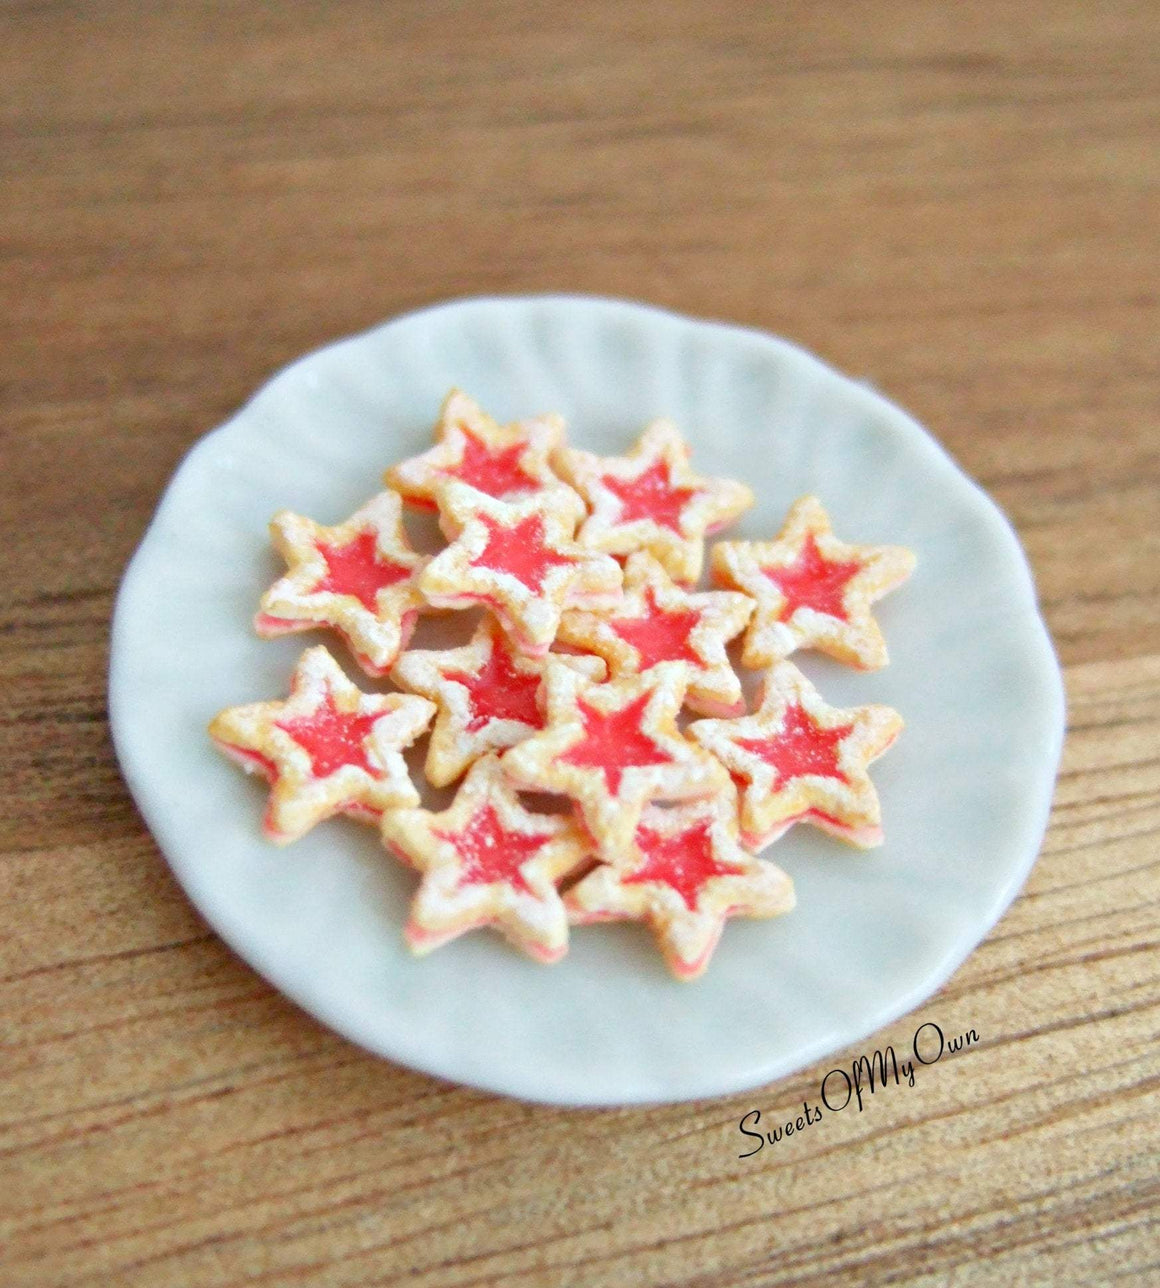 Plate of Miniature Star Jam Filled Biscuits 1:12 Scale - SweetsOfMyOwn